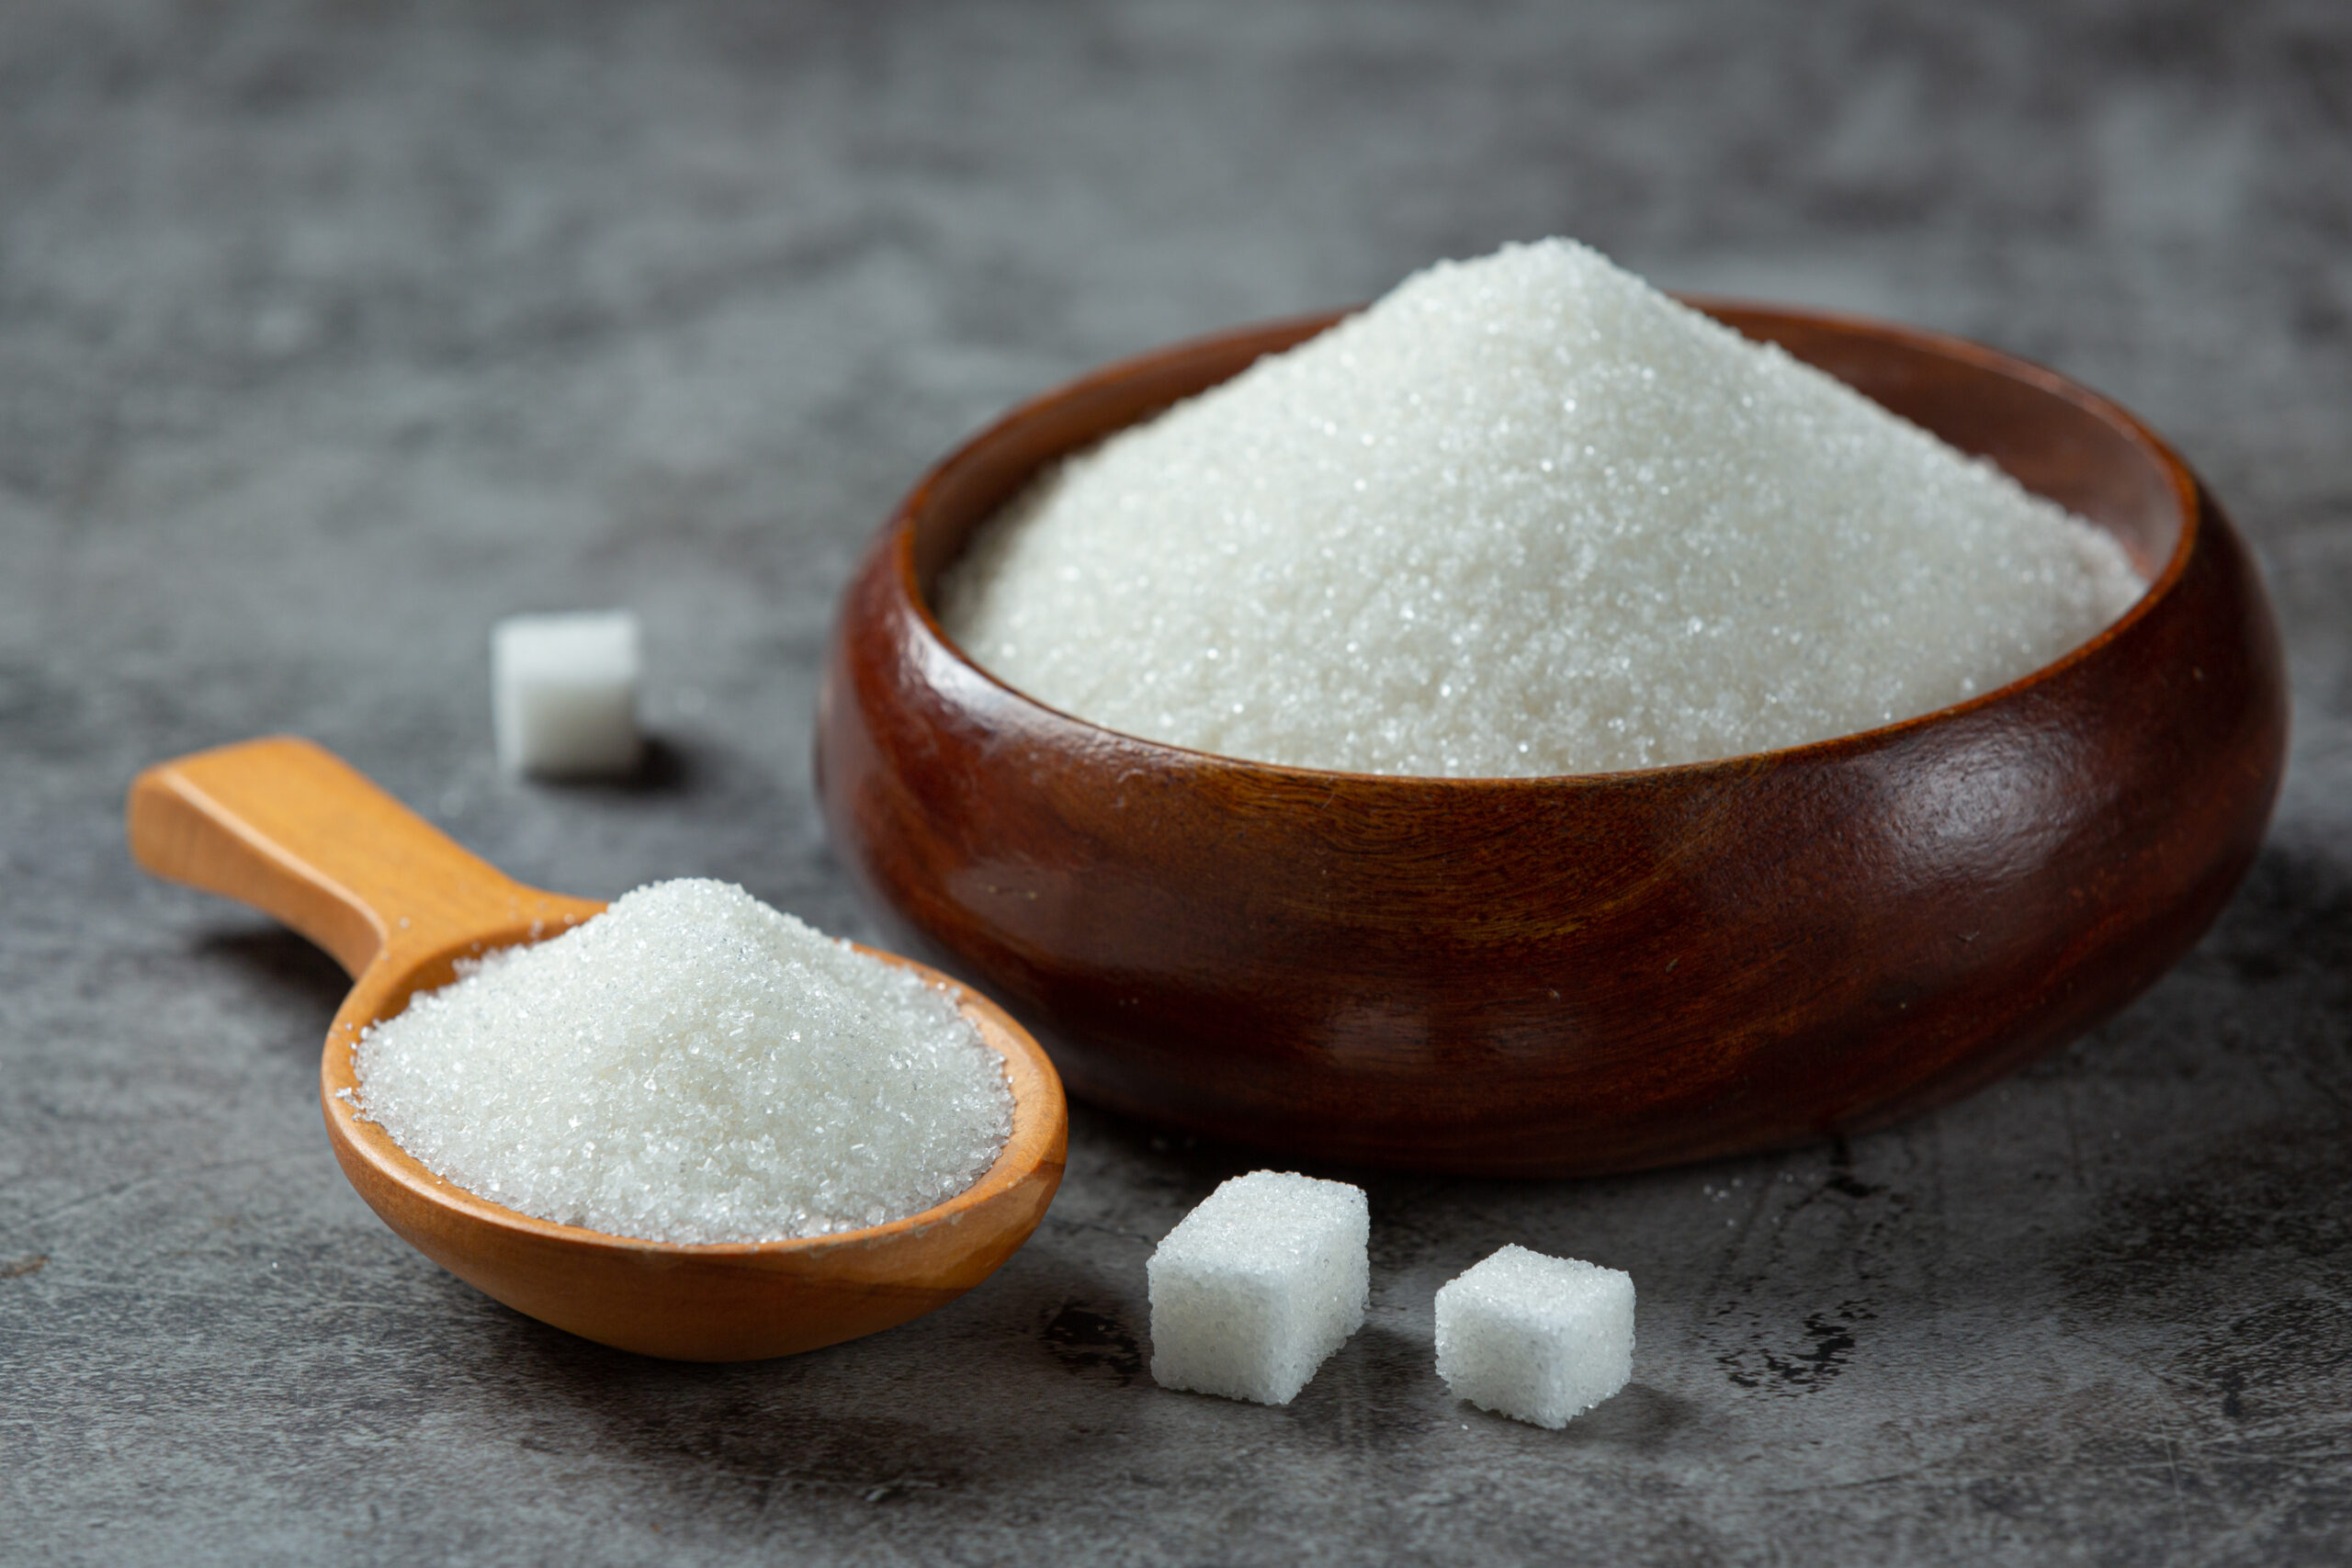 Artificial Sweeteners May Not Be Safe Sugar Alternatives